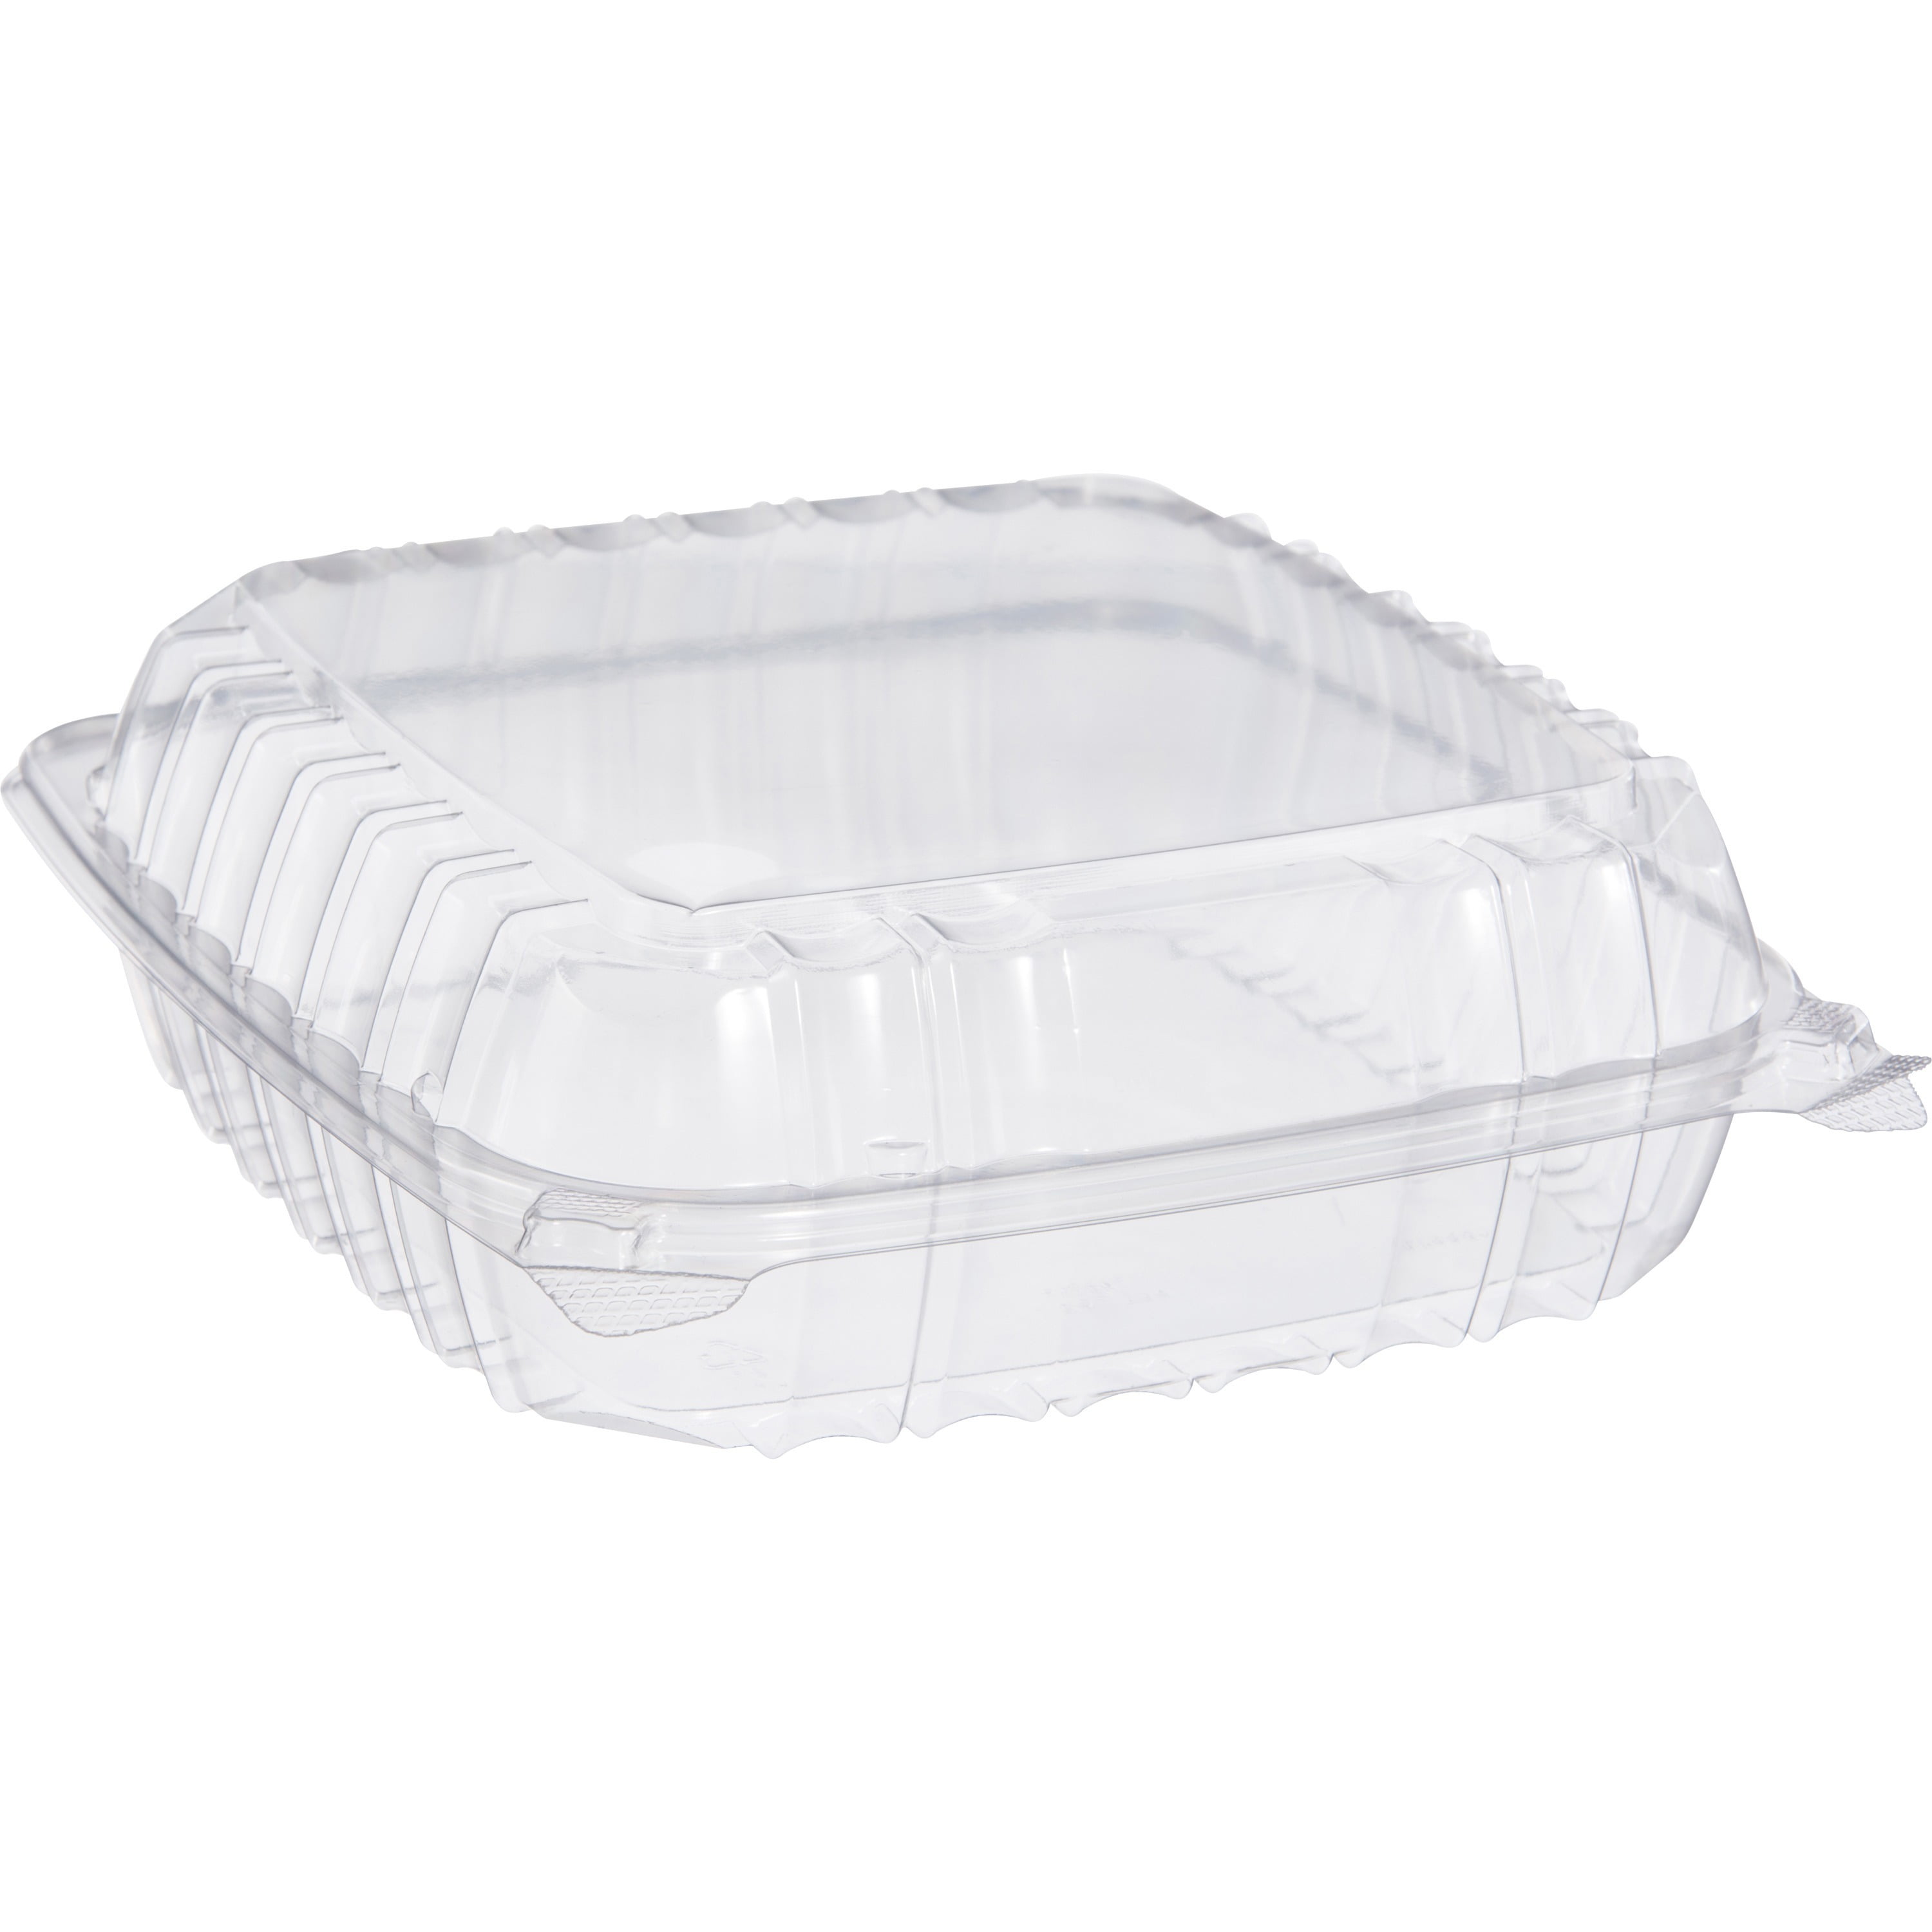 Dart C90pst3 8x8x3 3-compartment Sandwich Container With Hinged Lid 50 for sale online 